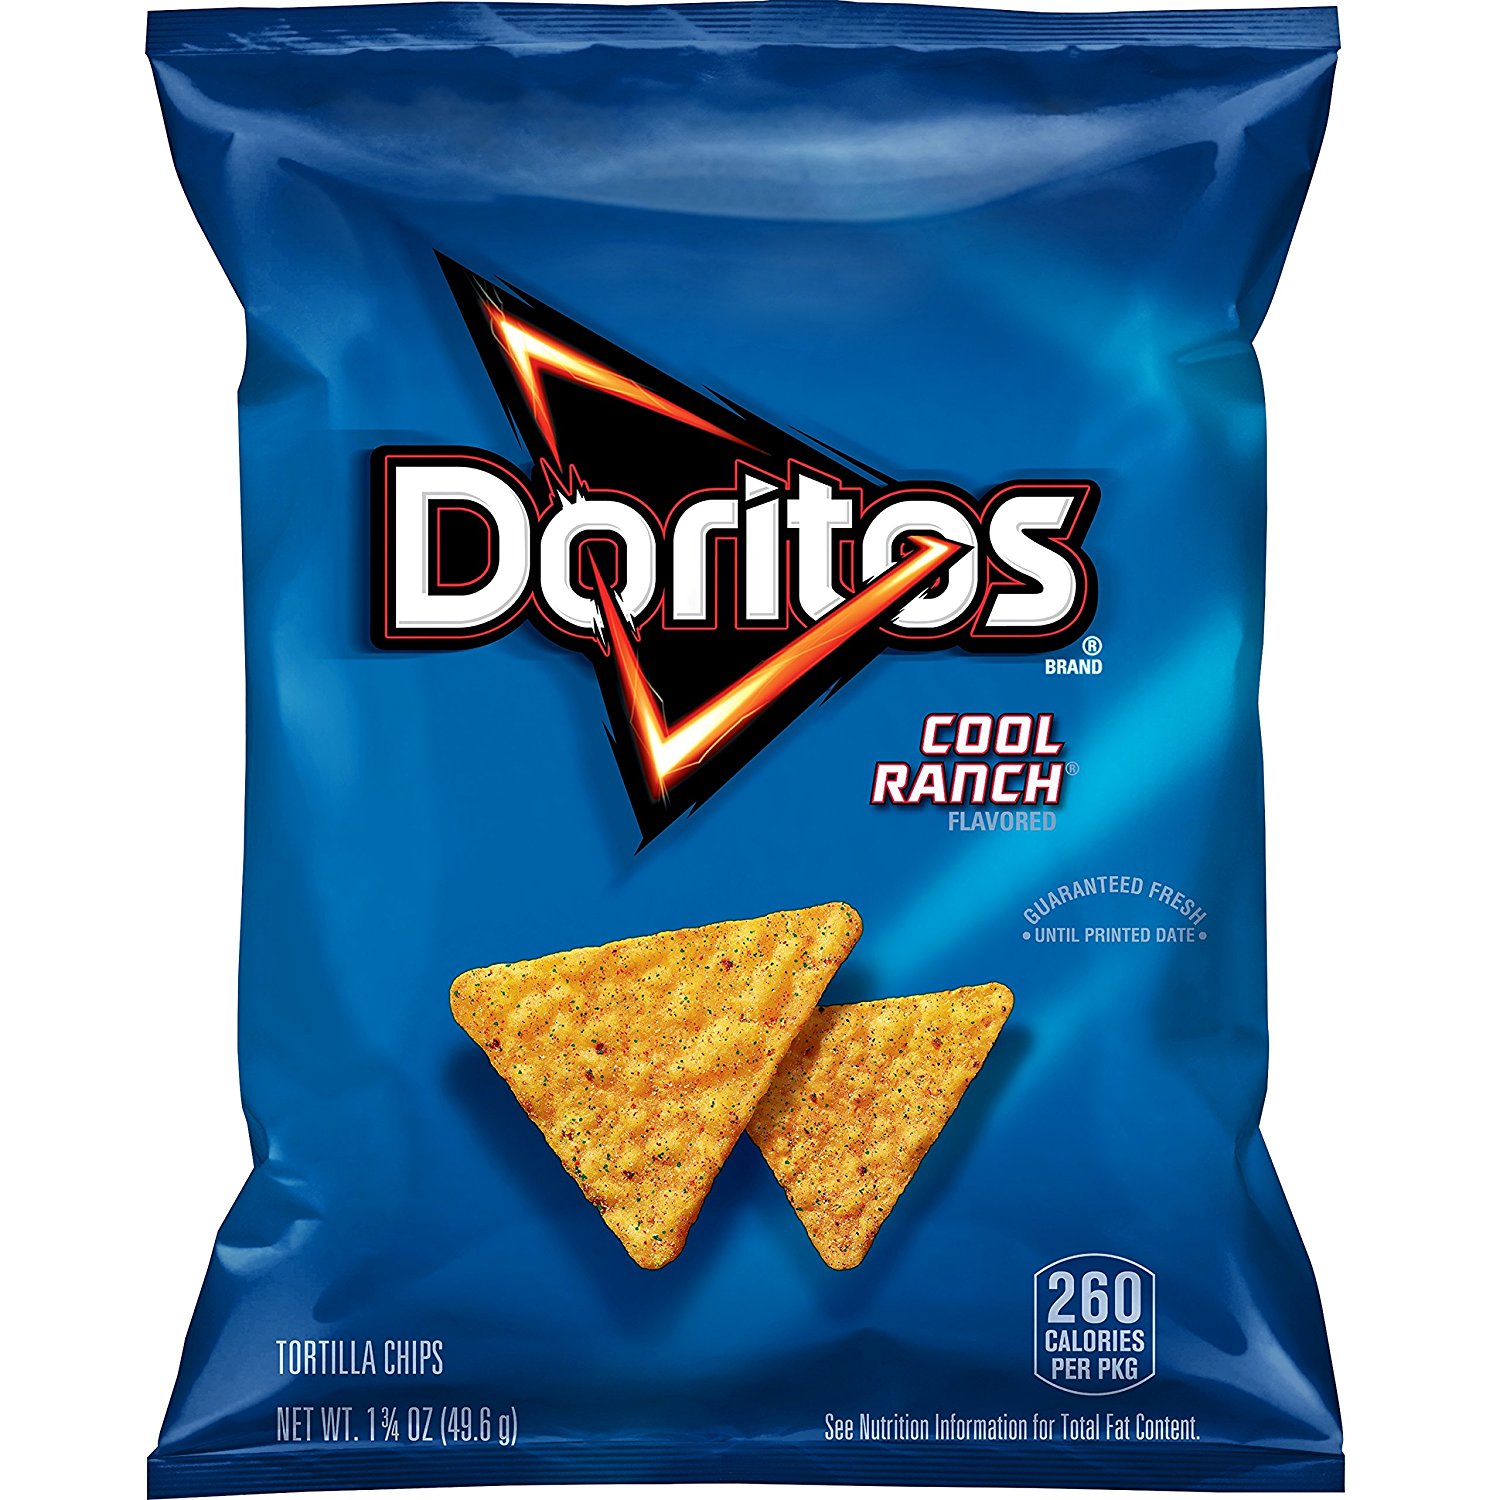 Episode 7: If it Smells Like Cool Ranch Doritos